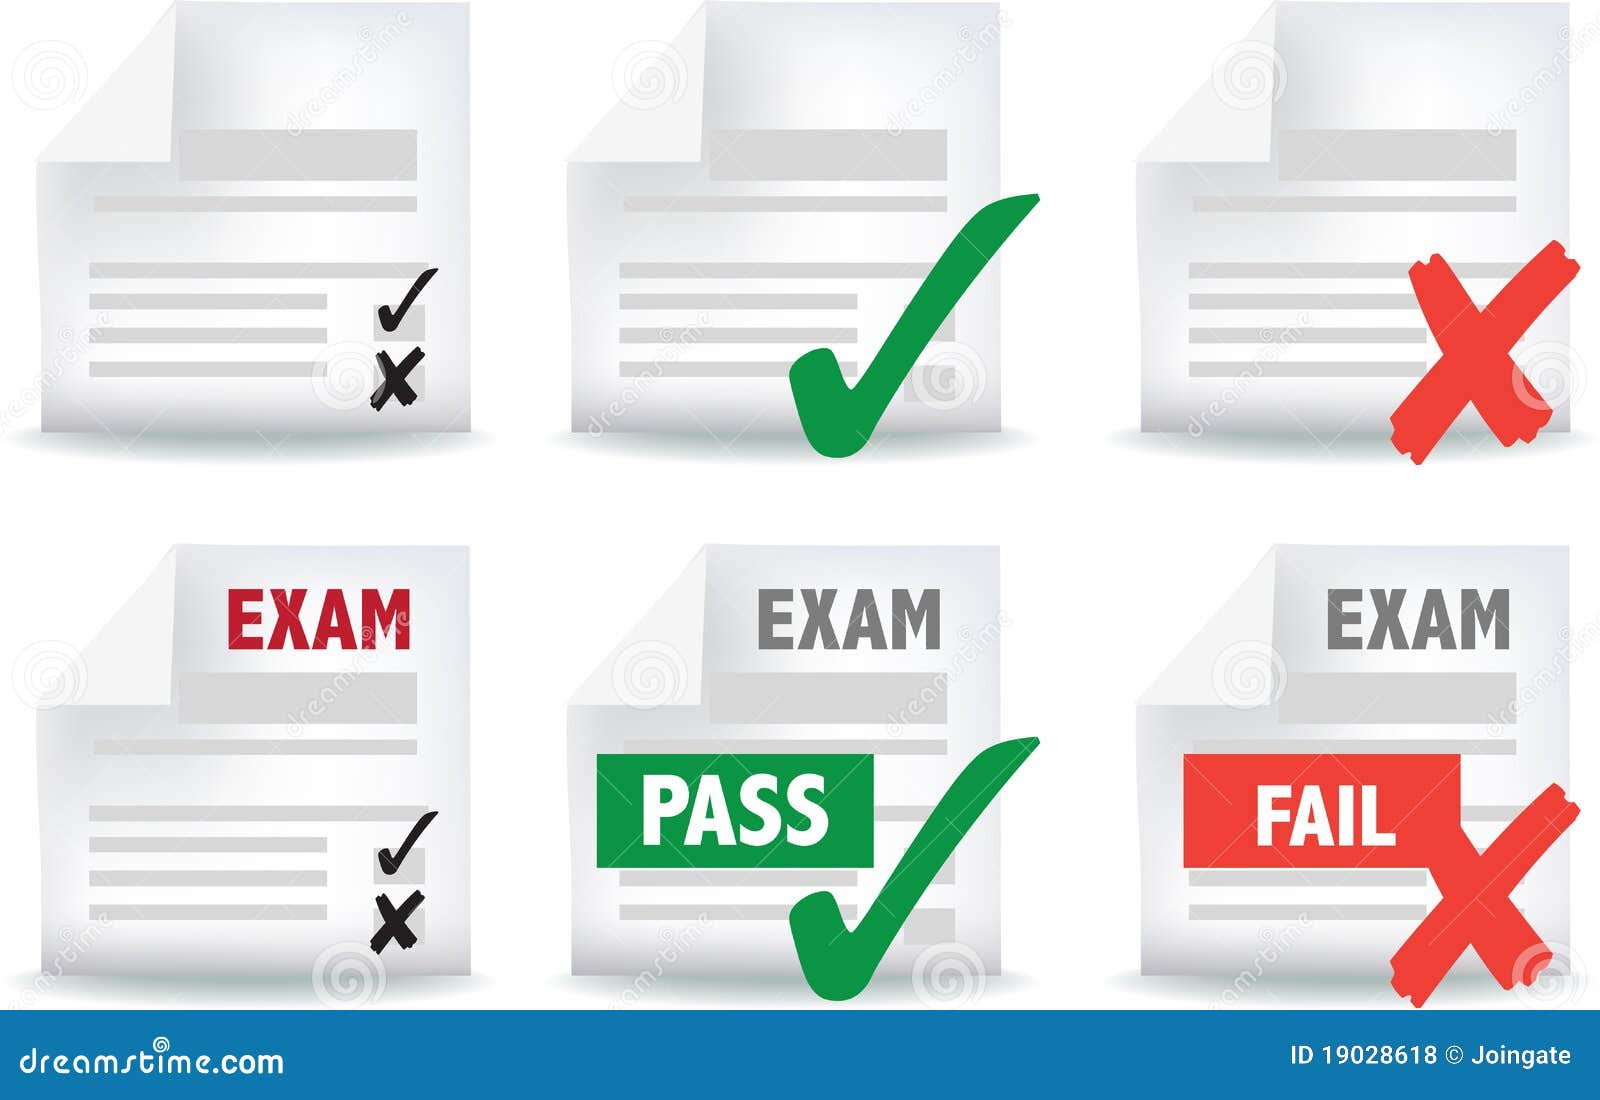 Buy cheap exam papers online